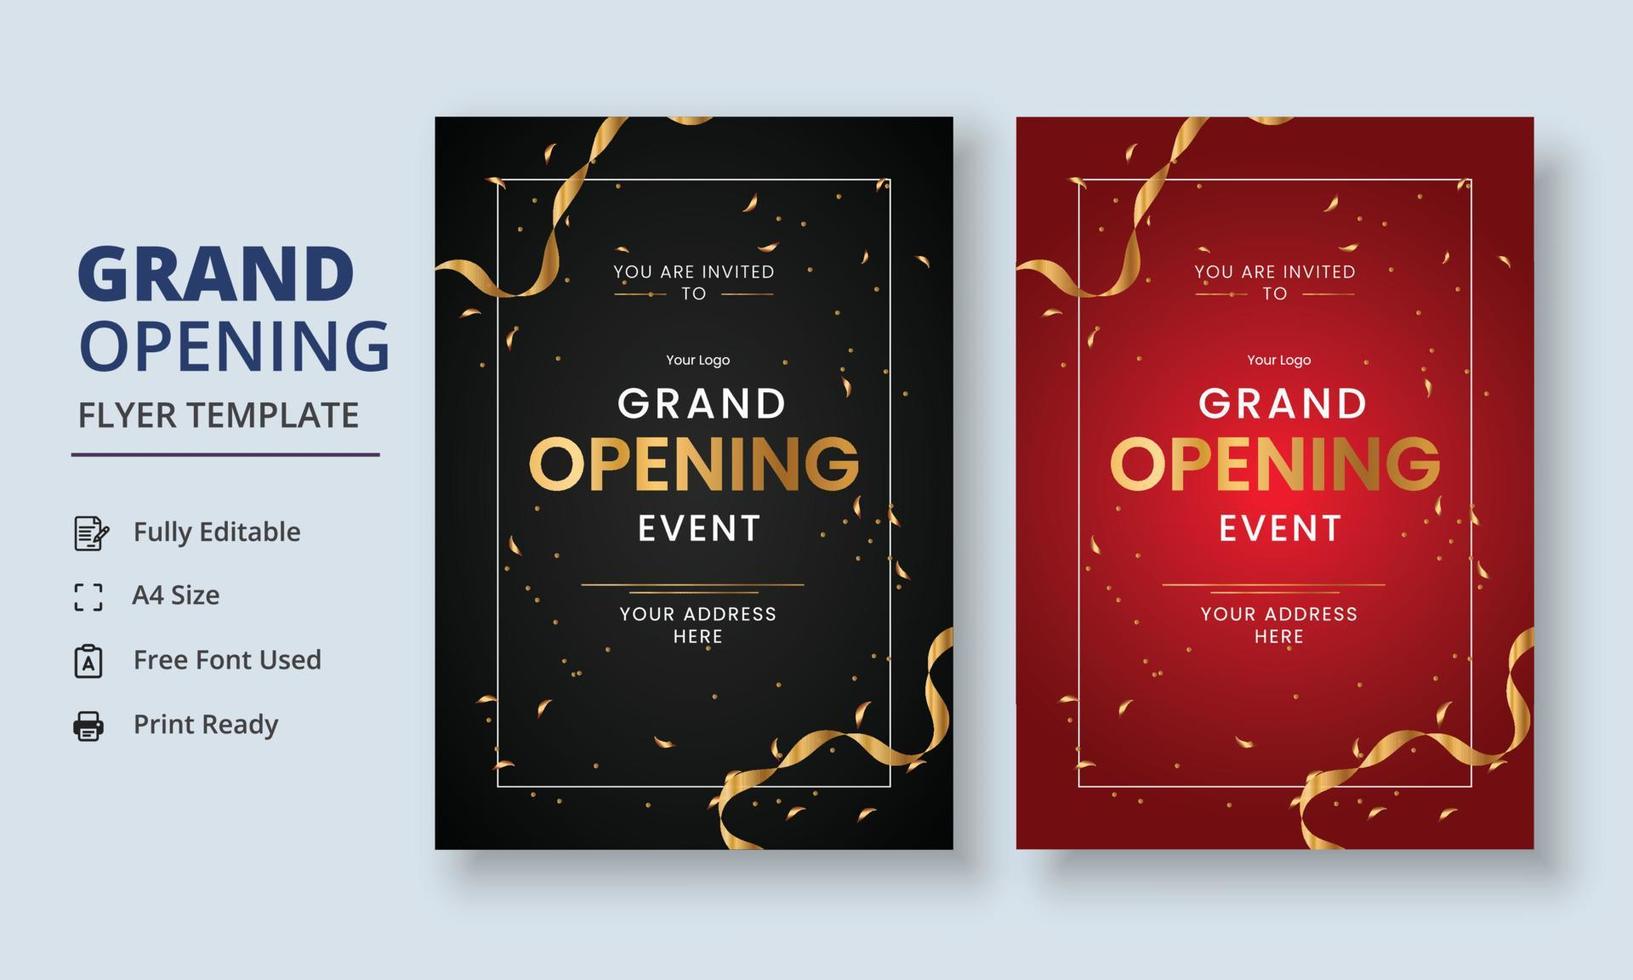 Grand Opening Flyer Template, Realistic grand Opening Invitation, Inauguration Flyer Template, Grand opening ceremony invitation flyer vector